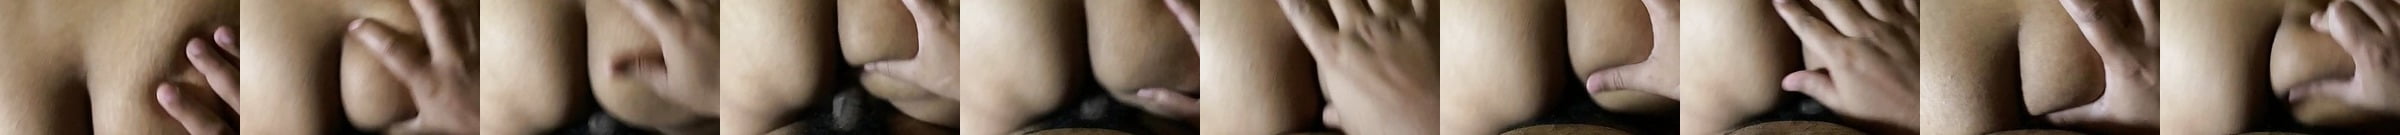 Indian Couple Homemade Porn Videos Xhamster 